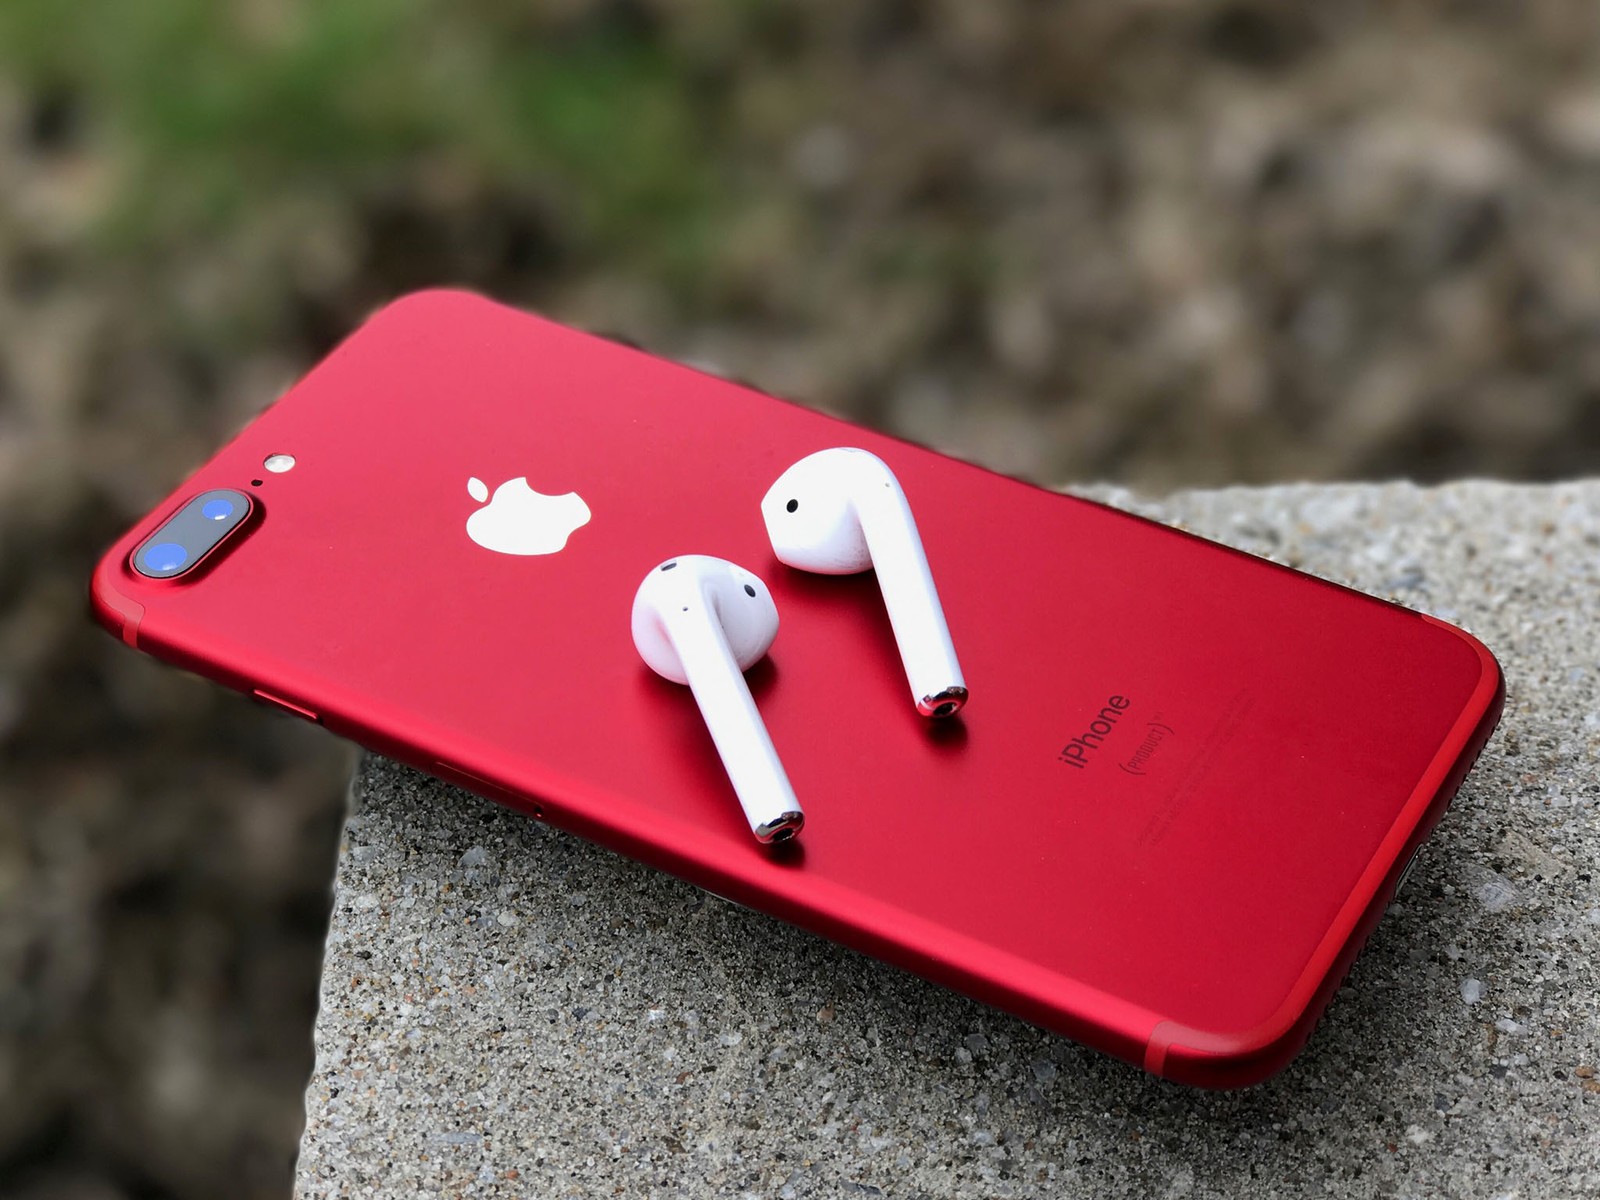 How can you choose the right AirPods for iPhone?